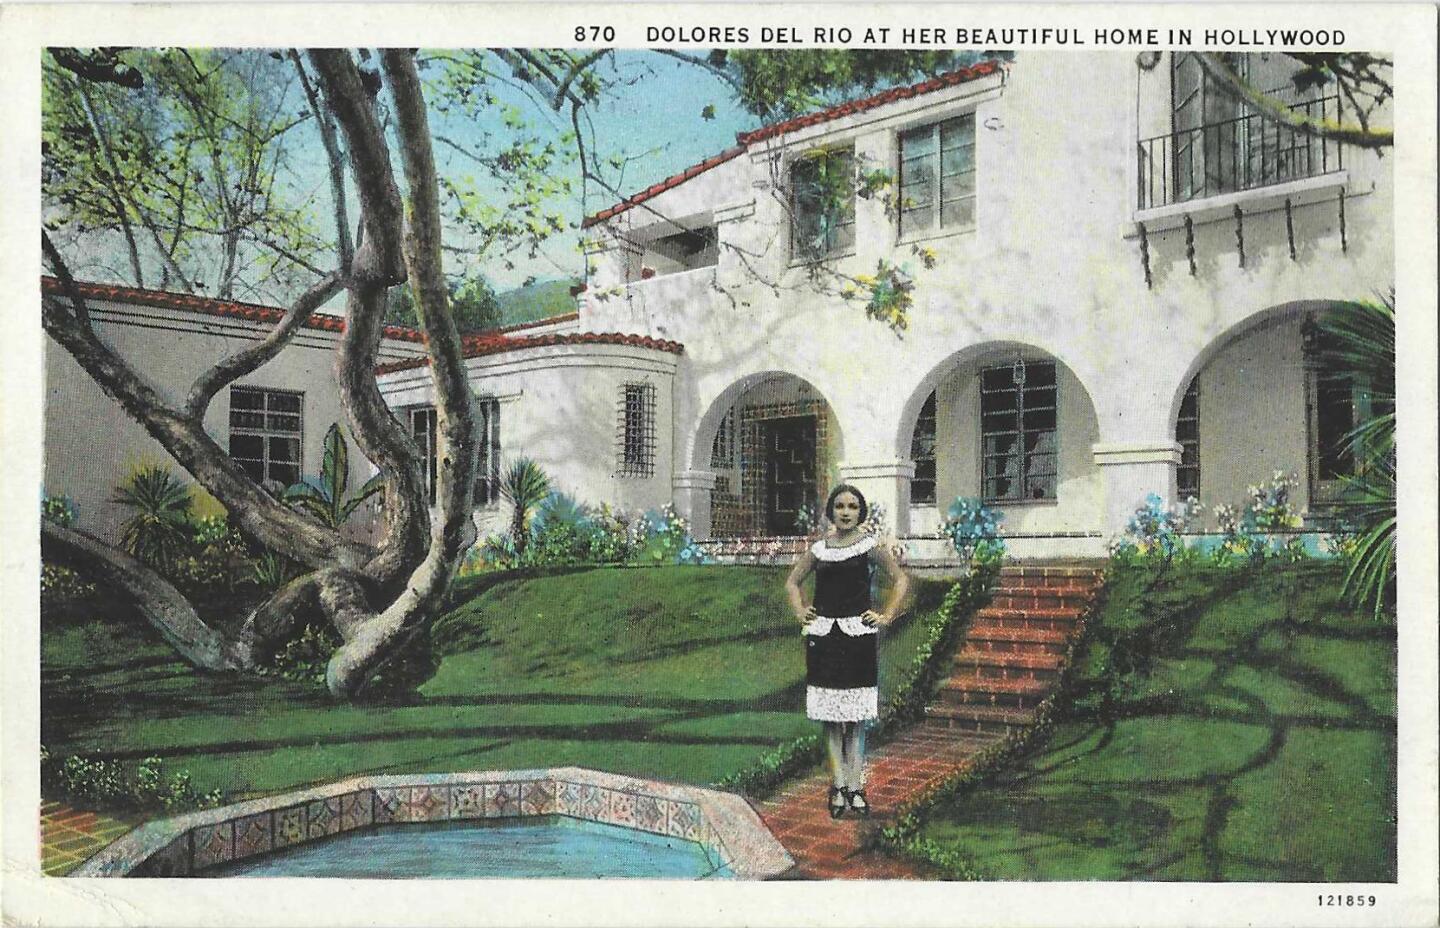 Dolores del Rio — an actor, singer and dancer with successful careers in Hollywood and Mexico — in front of her Spanish-style home in a postcard from Patt Morrison's collection.